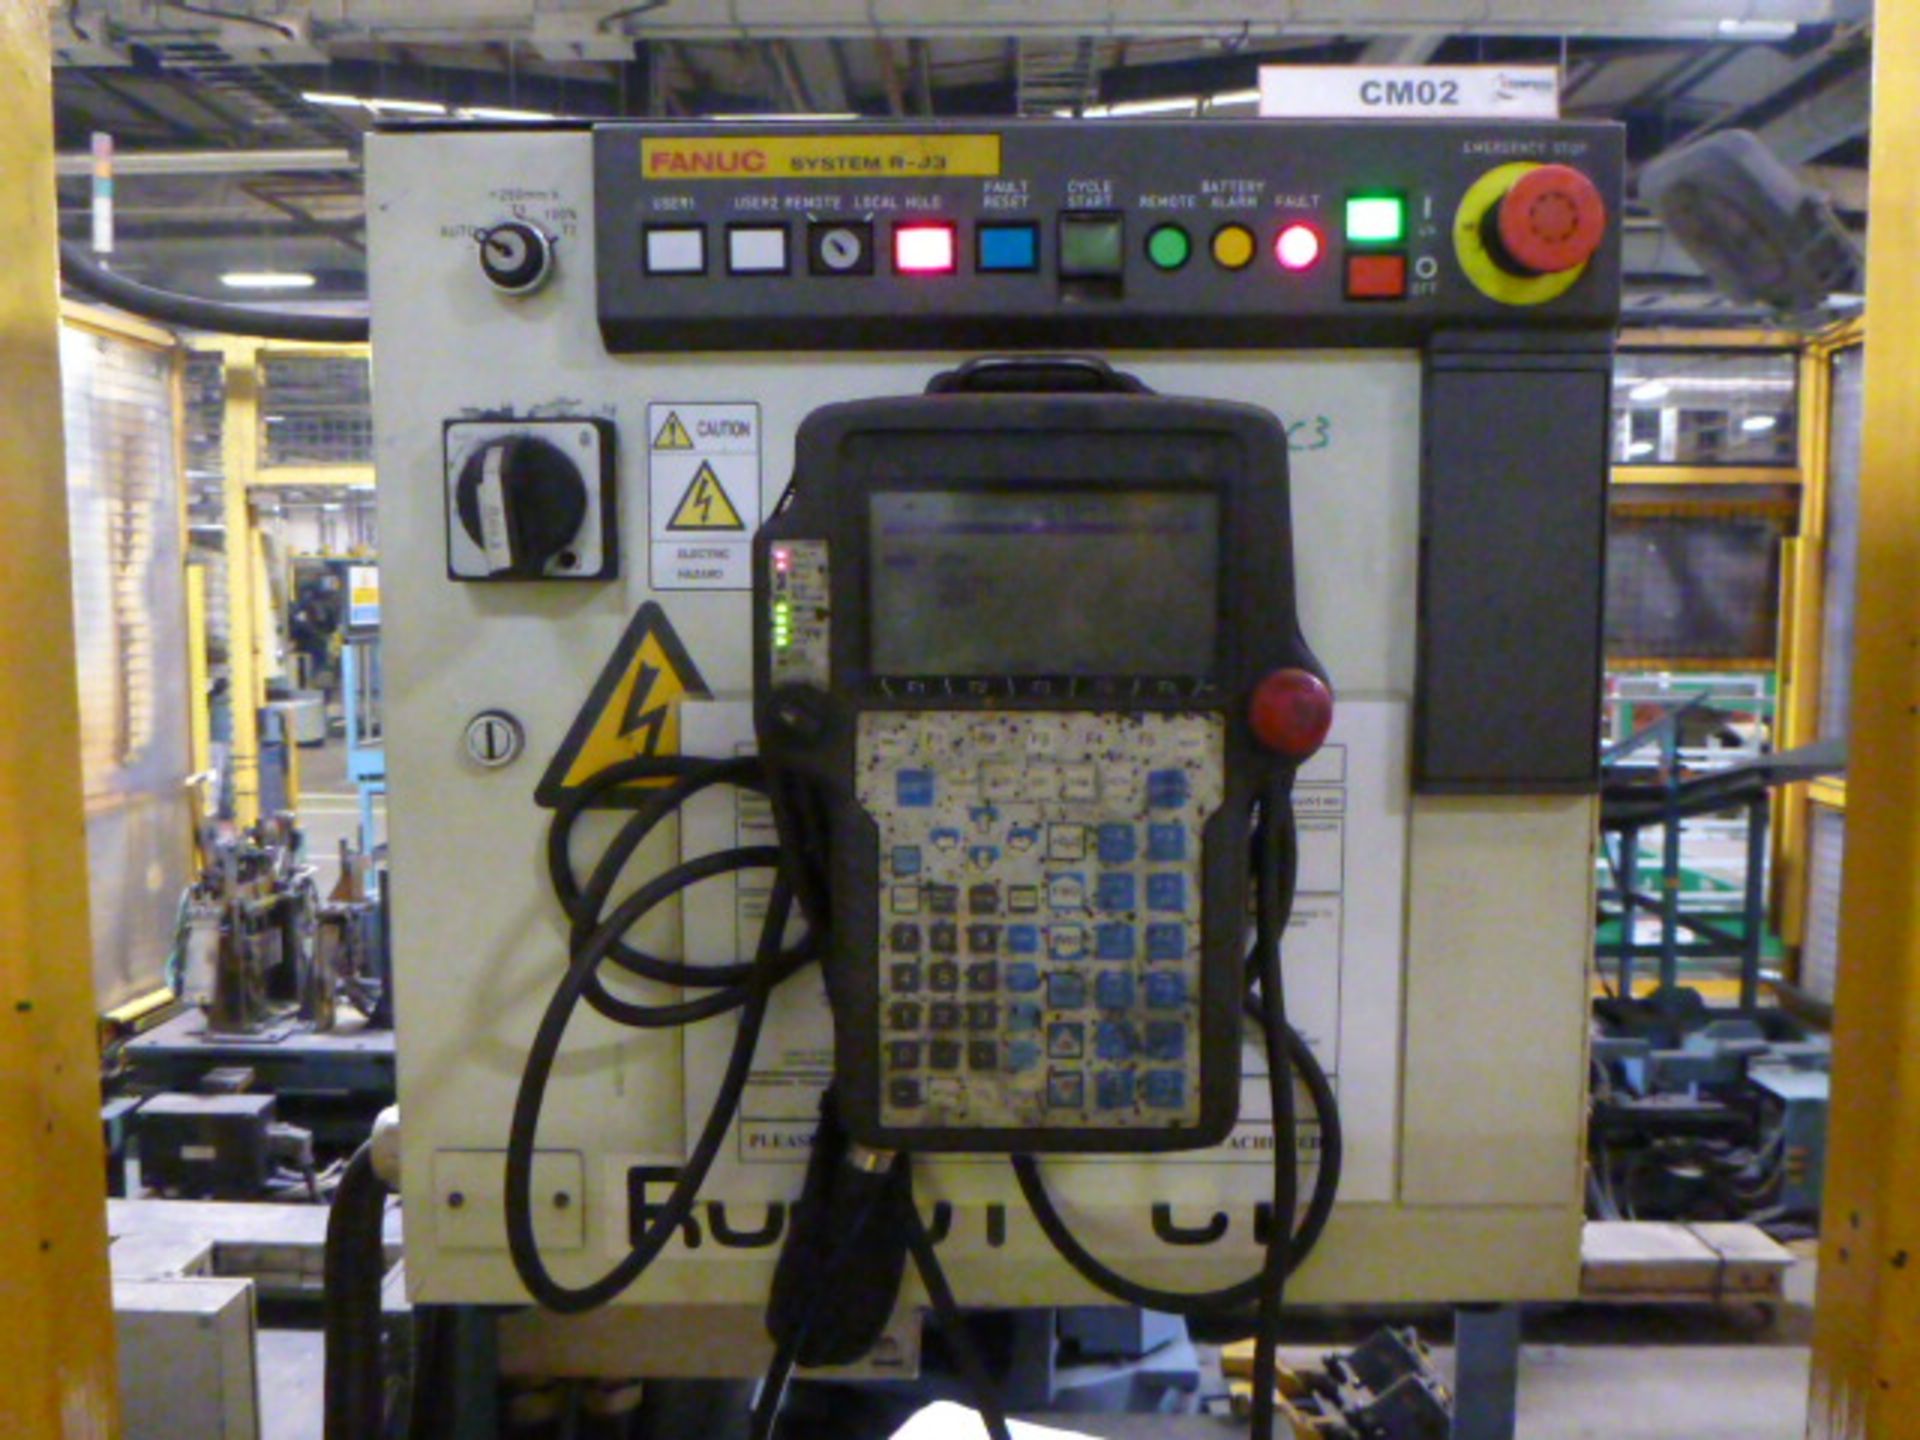 Fanuc S-430iW Pick & Place Robot (2000) CM02 - Image 7 of 8